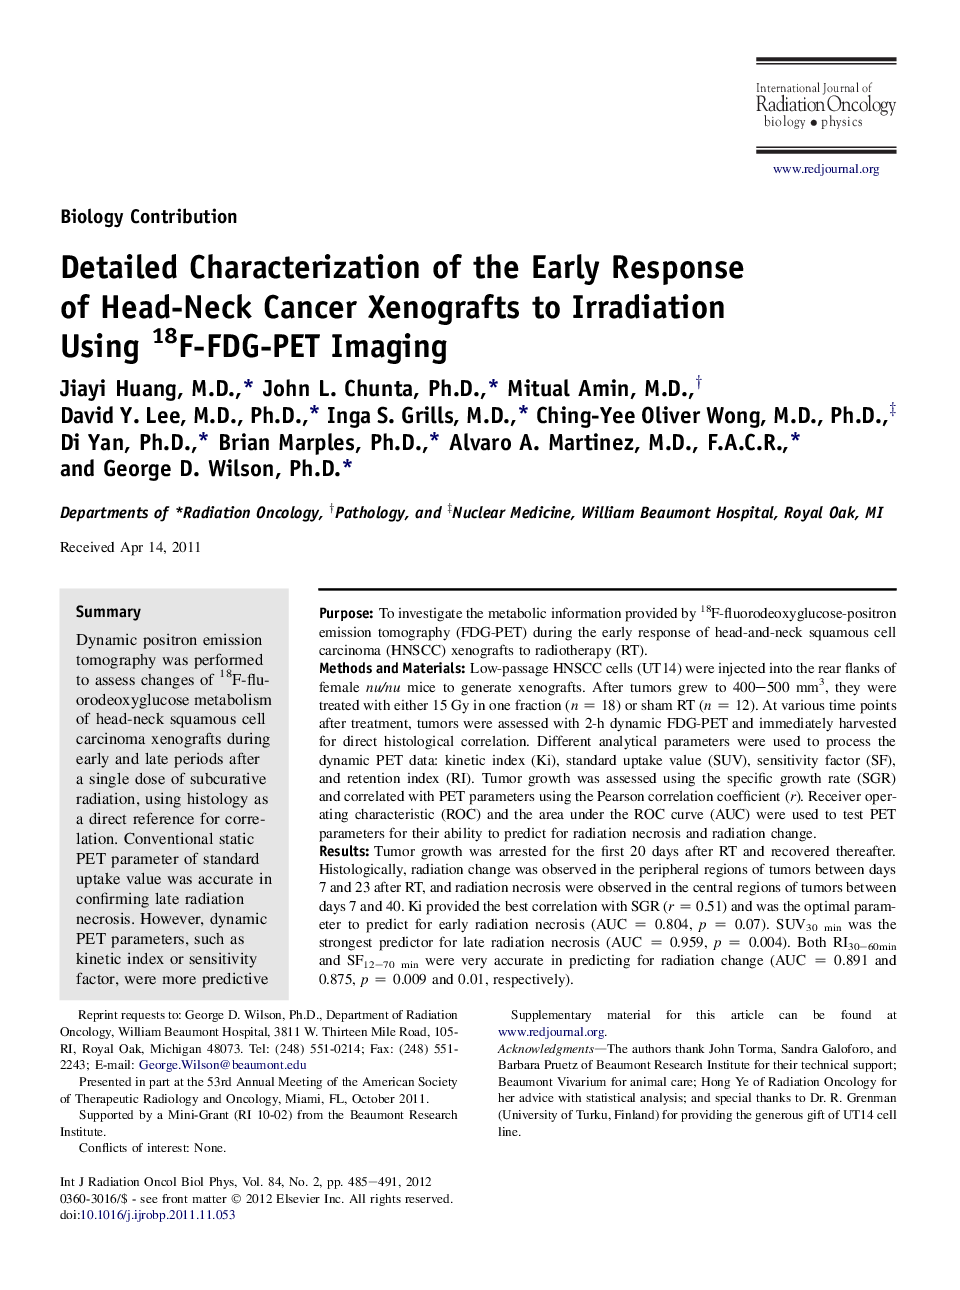 Detailed Characterization of the Early Response of Head-Neck Cancer Xenografts to Irradiation Using 18F-FDG-PET Imaging